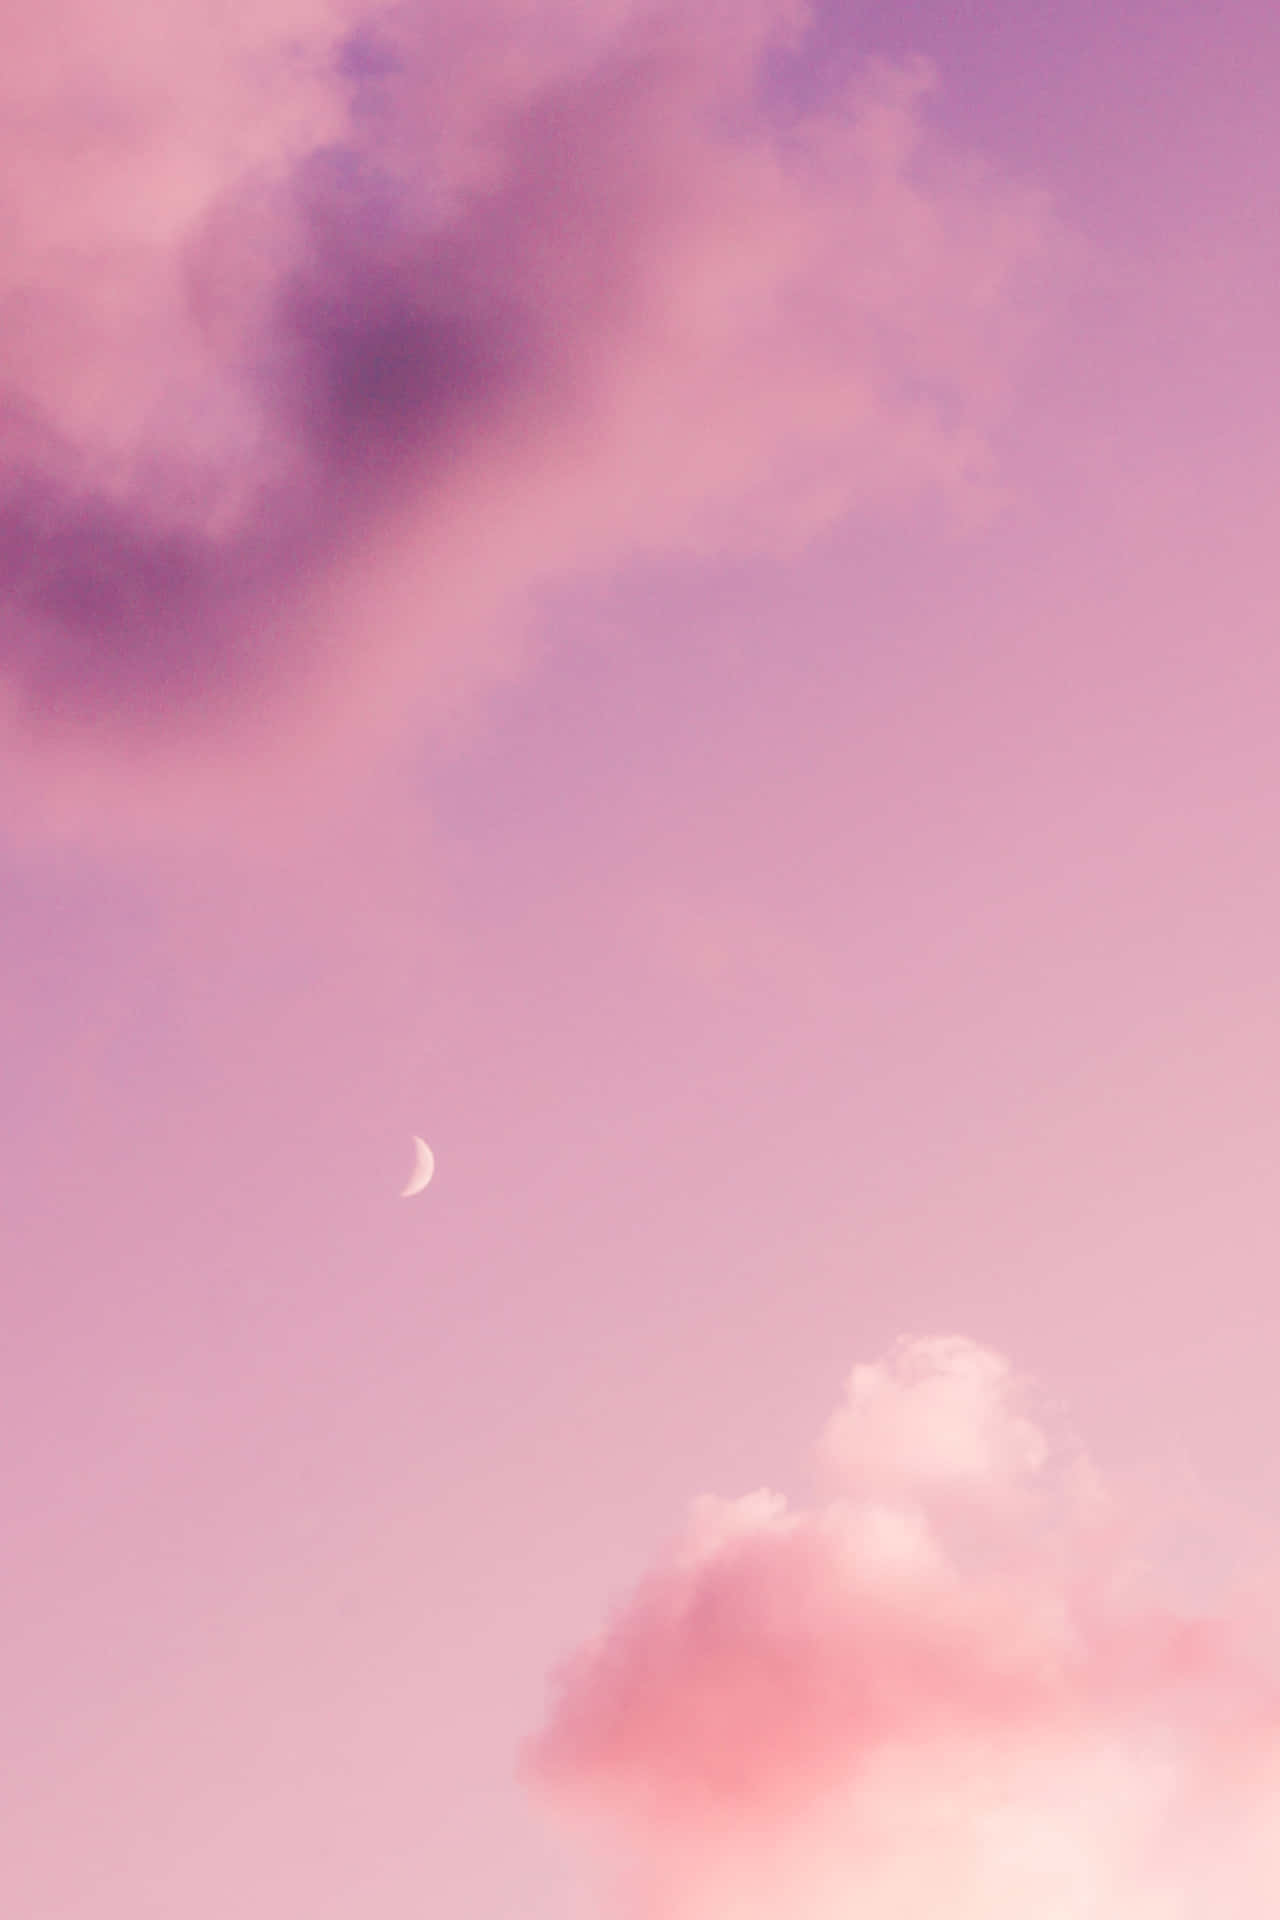 Download A Pink Sky With Clouds And A Moon | Wallpapers.com